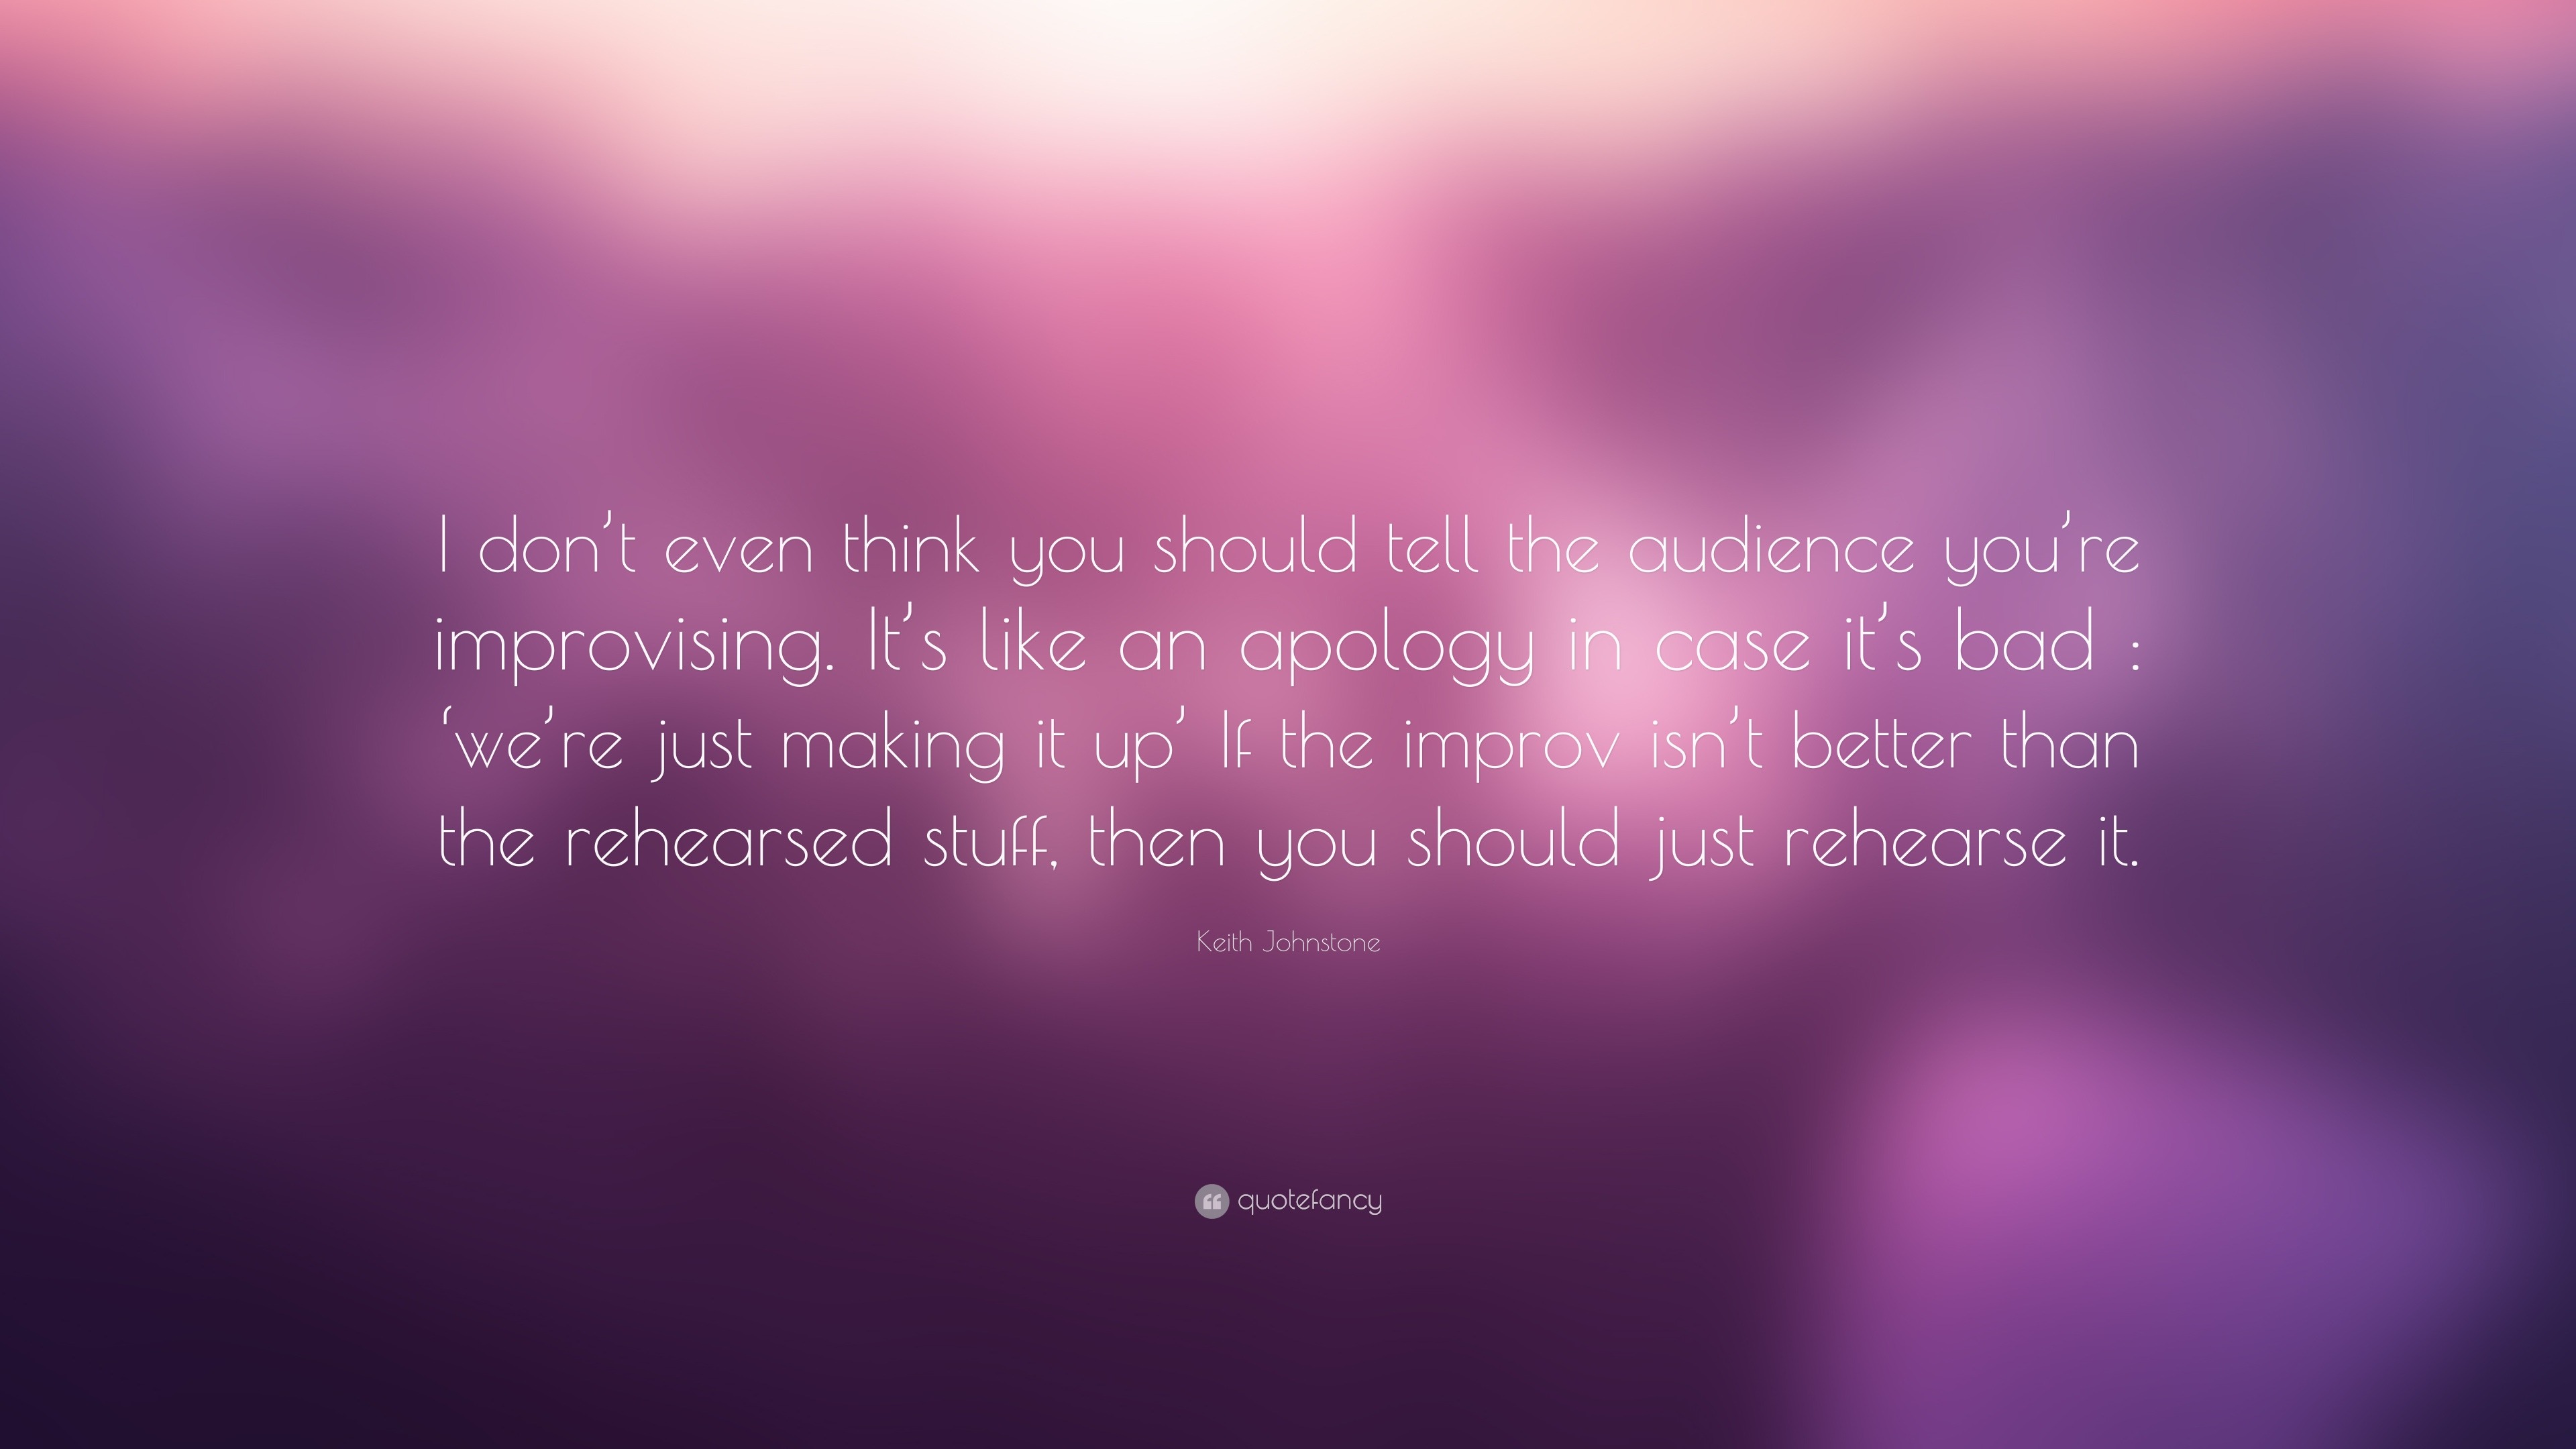 Keith Johnstone Quote: “I don’t even think you should tell the audience ...